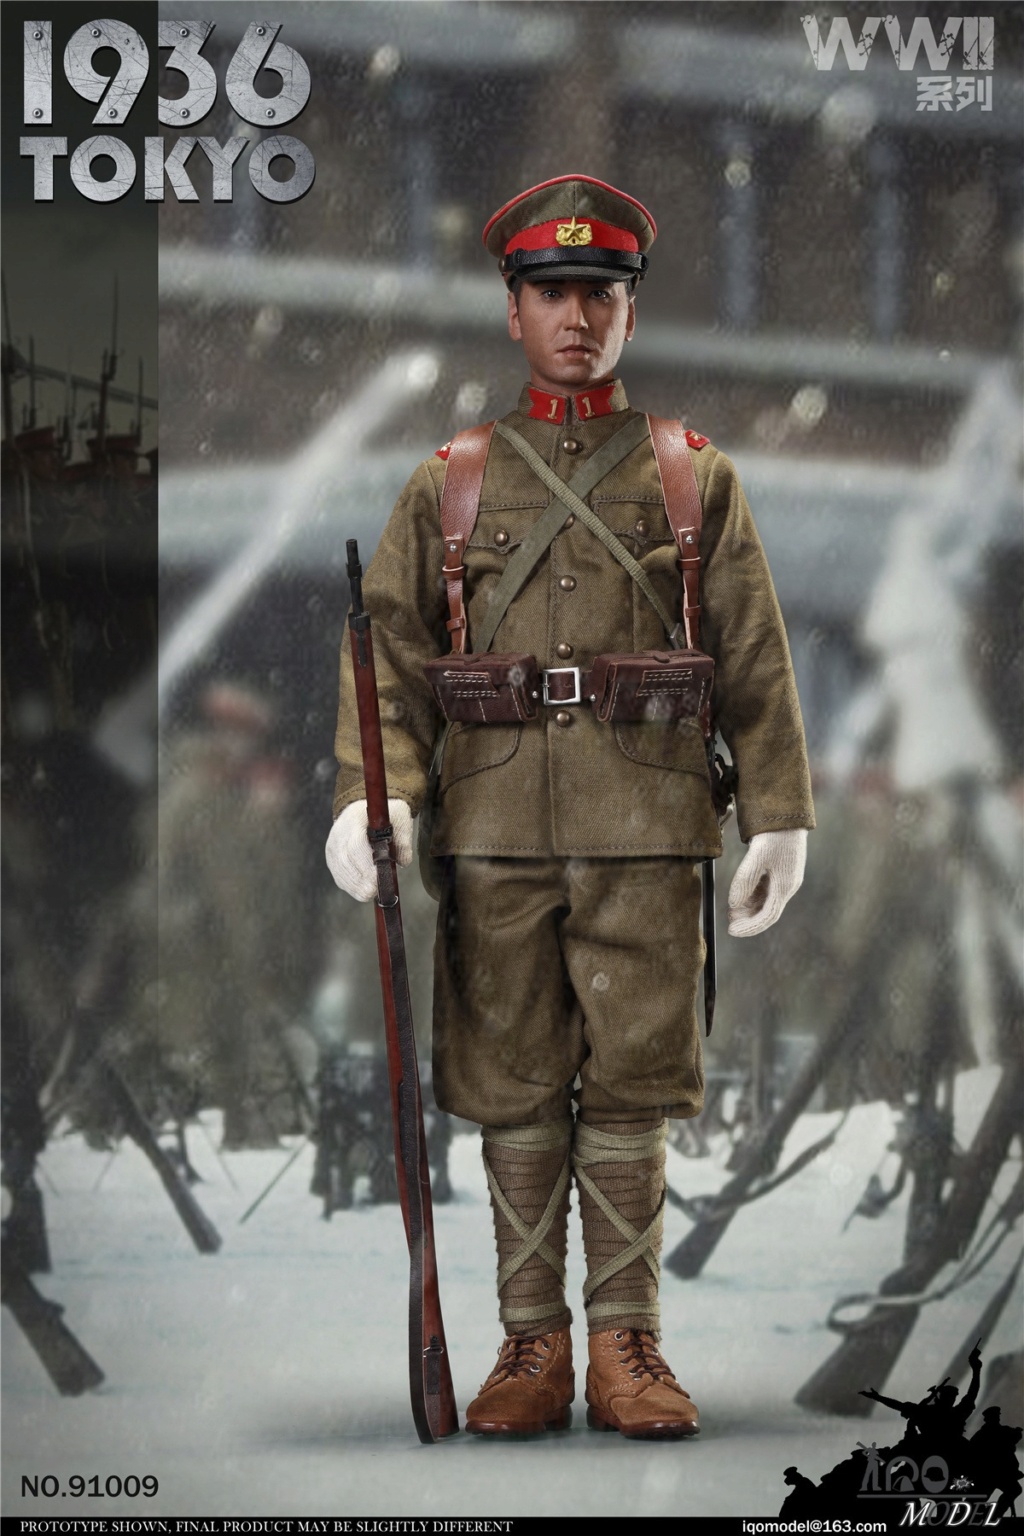 Tokyo - NEW PRODUCT: IQO Model: 1/6 WWII Series 1936 Tokyo (NO.91009) 15463711